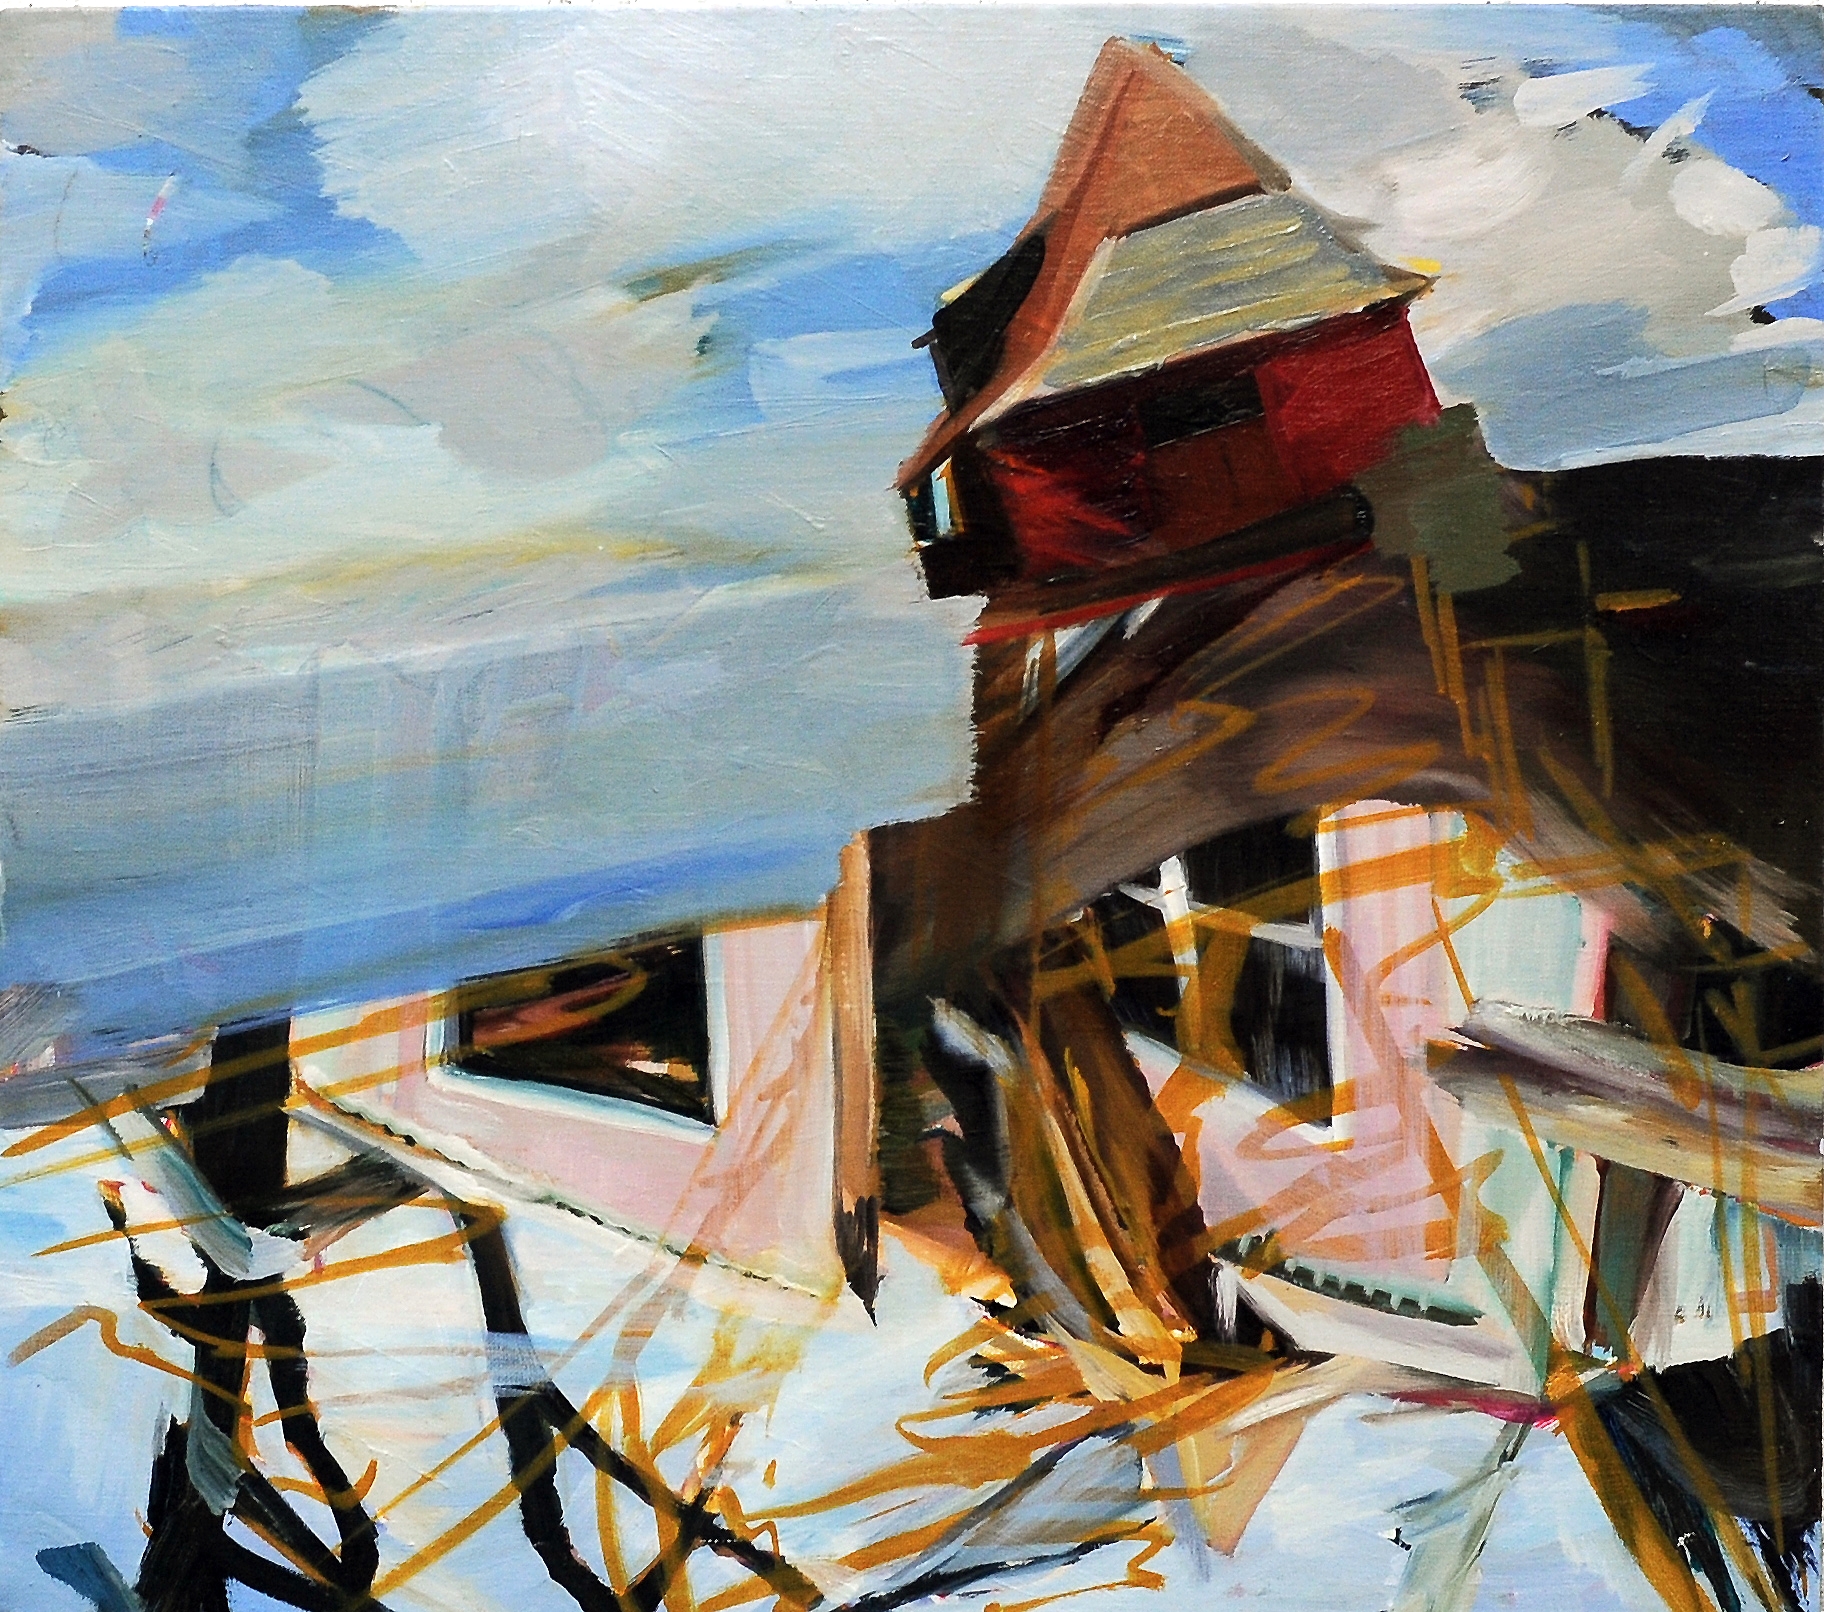   Untitled , 2008, oil on canvas, 50 x 65cm. Private collection, France&nbsp; 